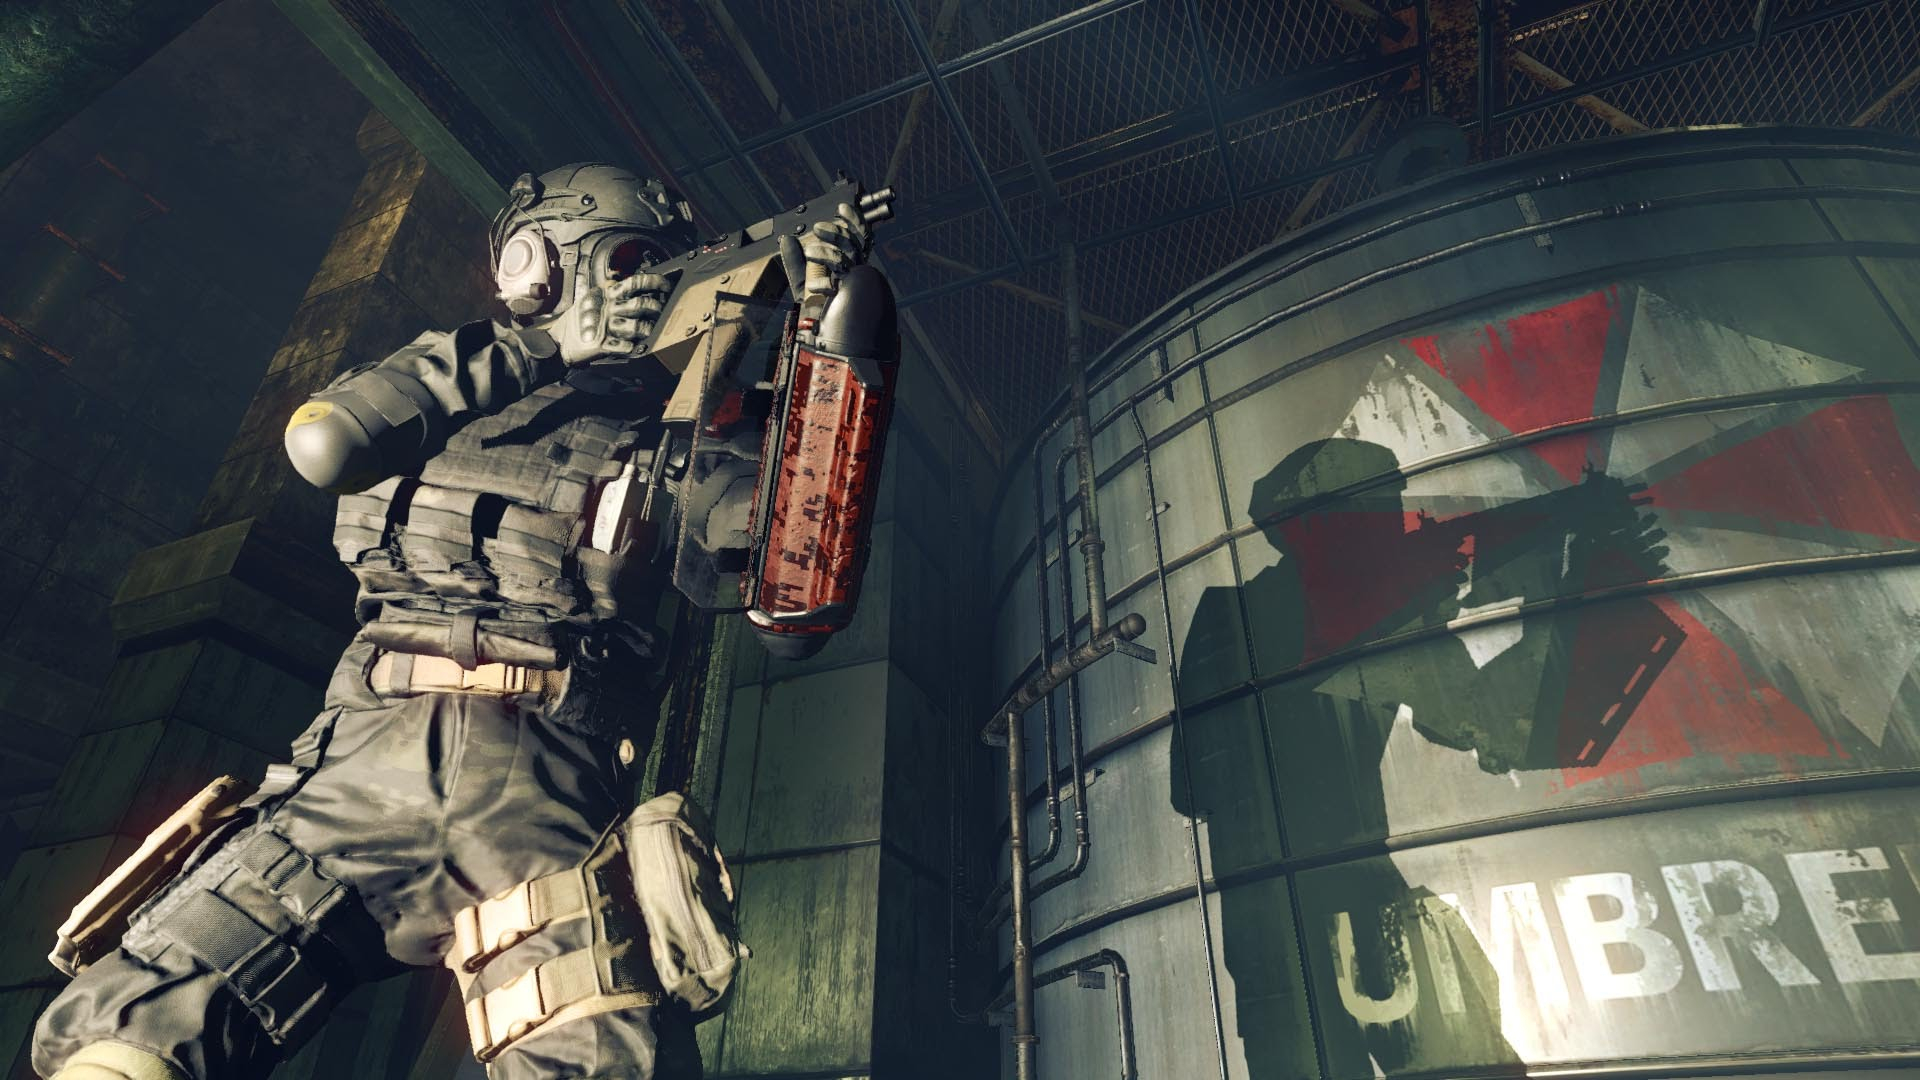 1920x1080 New Umbrella Corps Trailer Reveals Release Date, Maps Rely on Horror